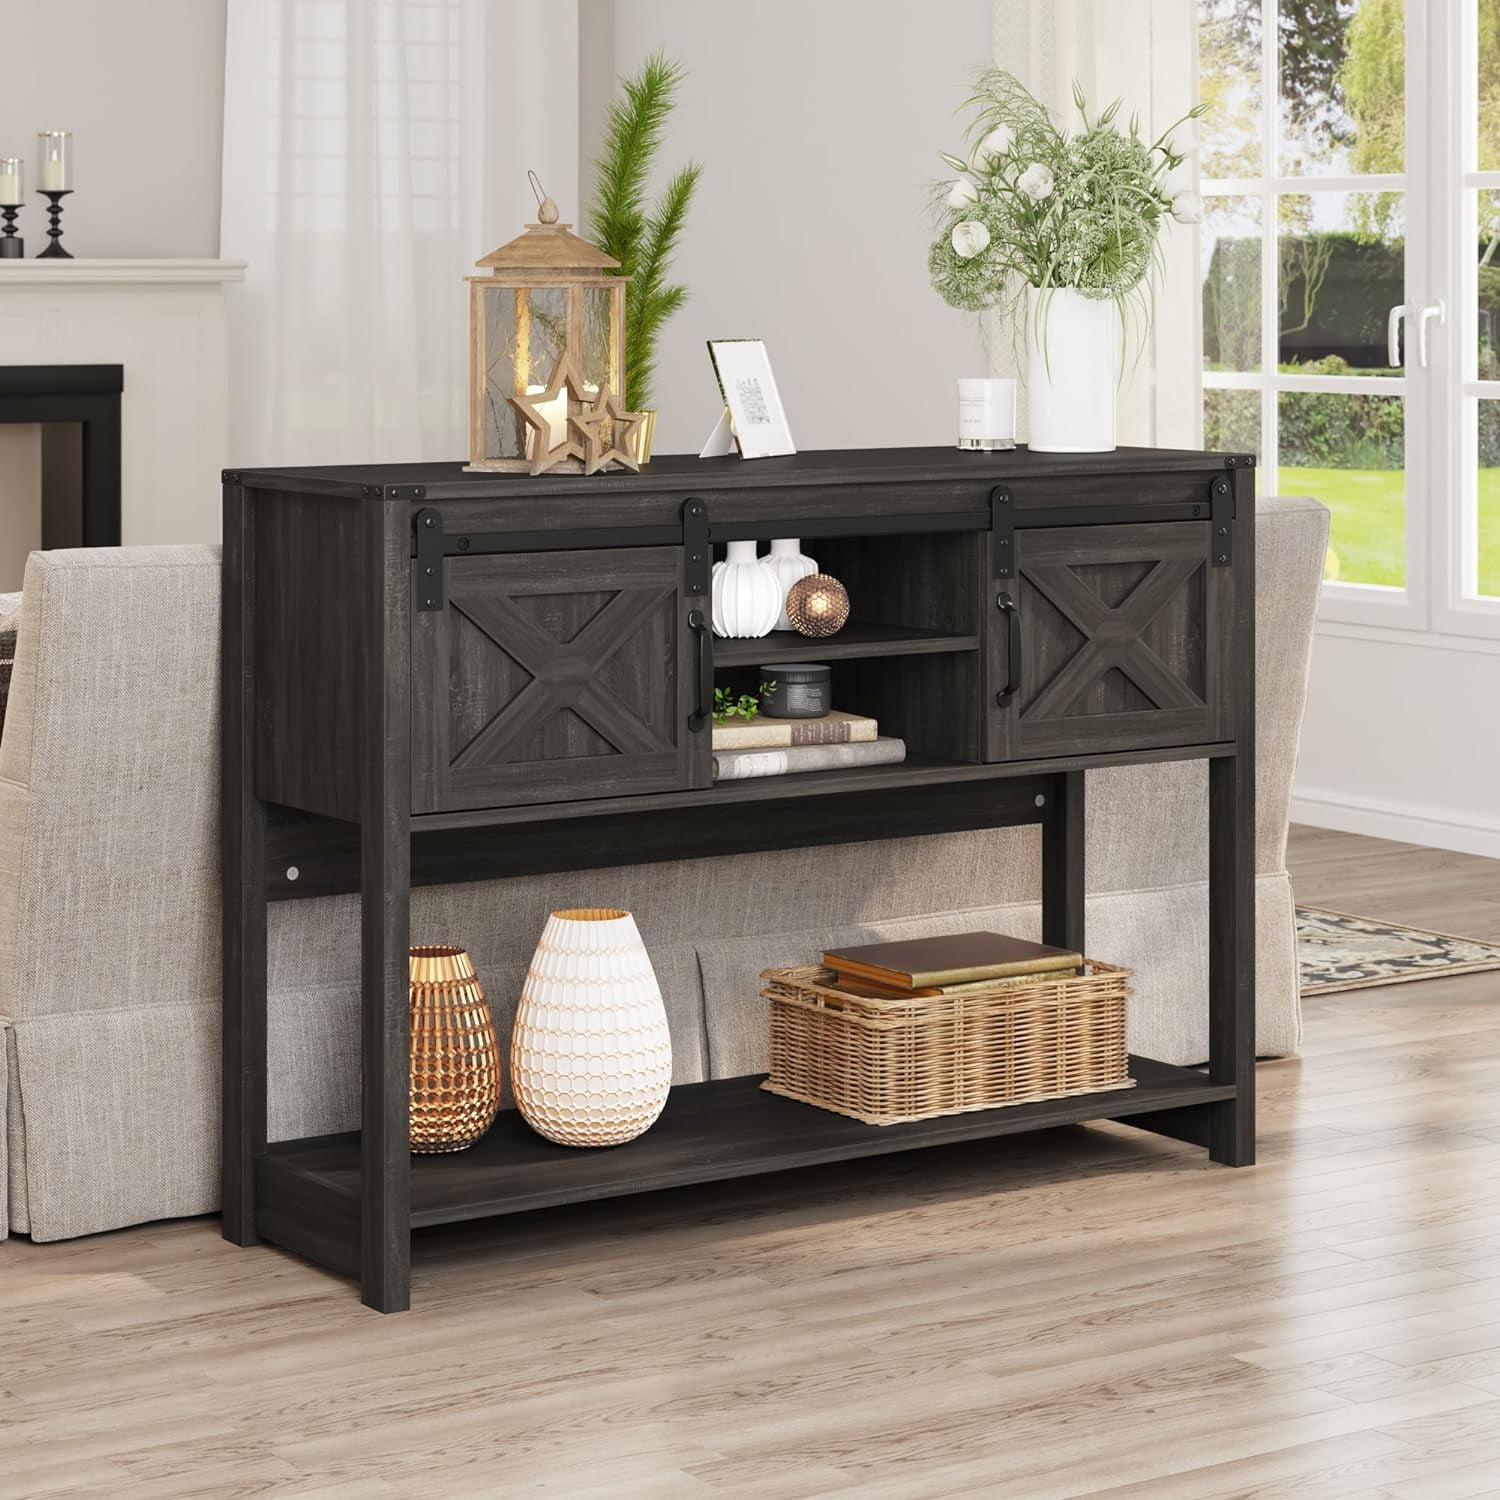 Cozyhom Console Table With Storages